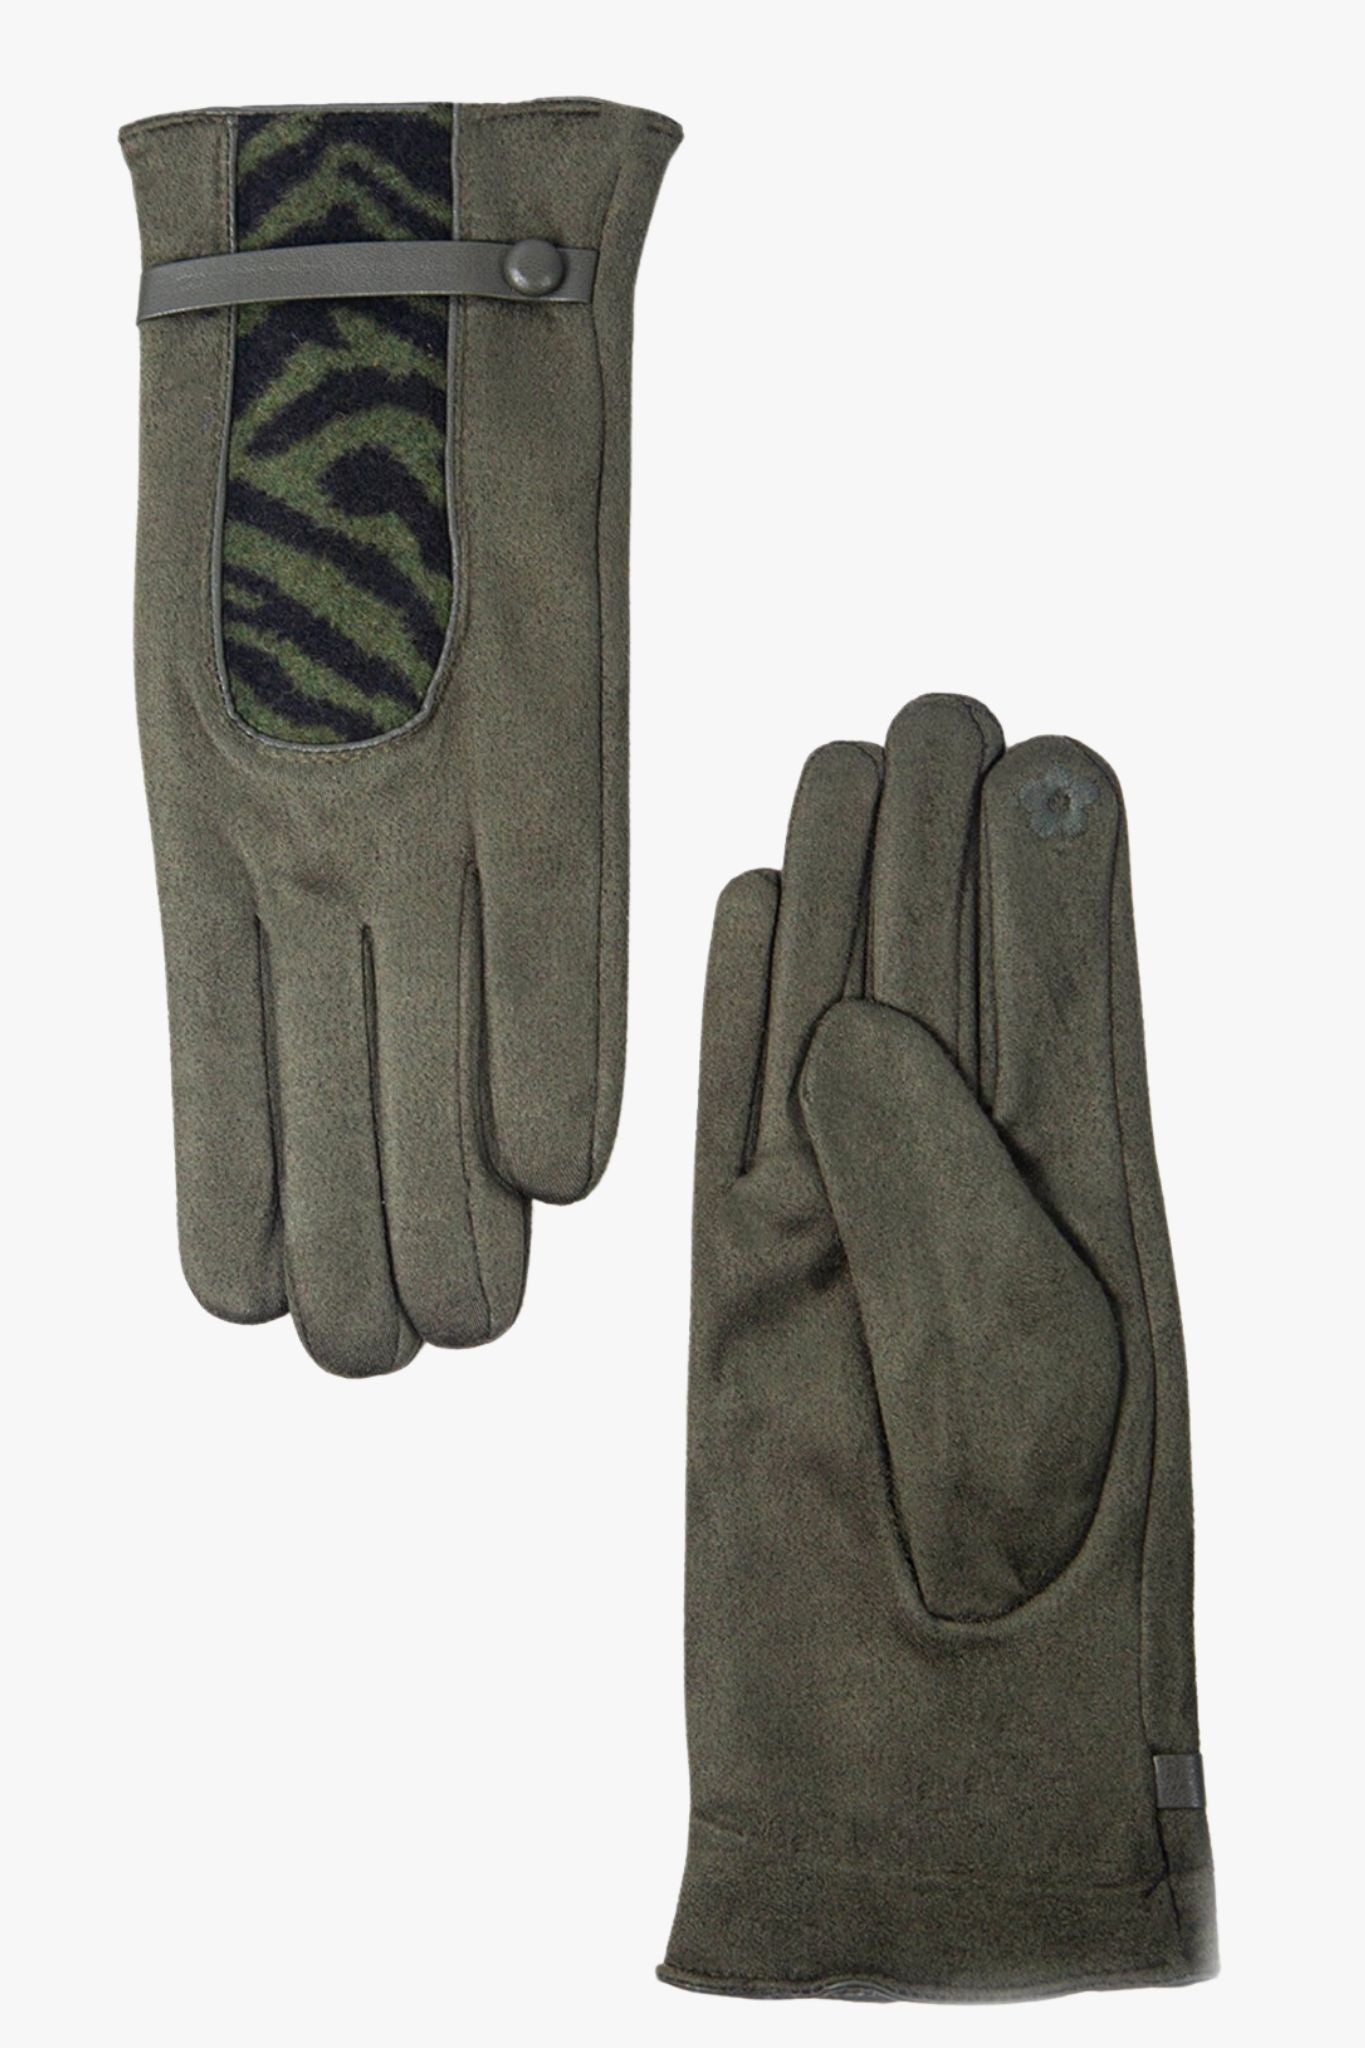 khaki green animal print winter gloves with a touch screen responive index finger